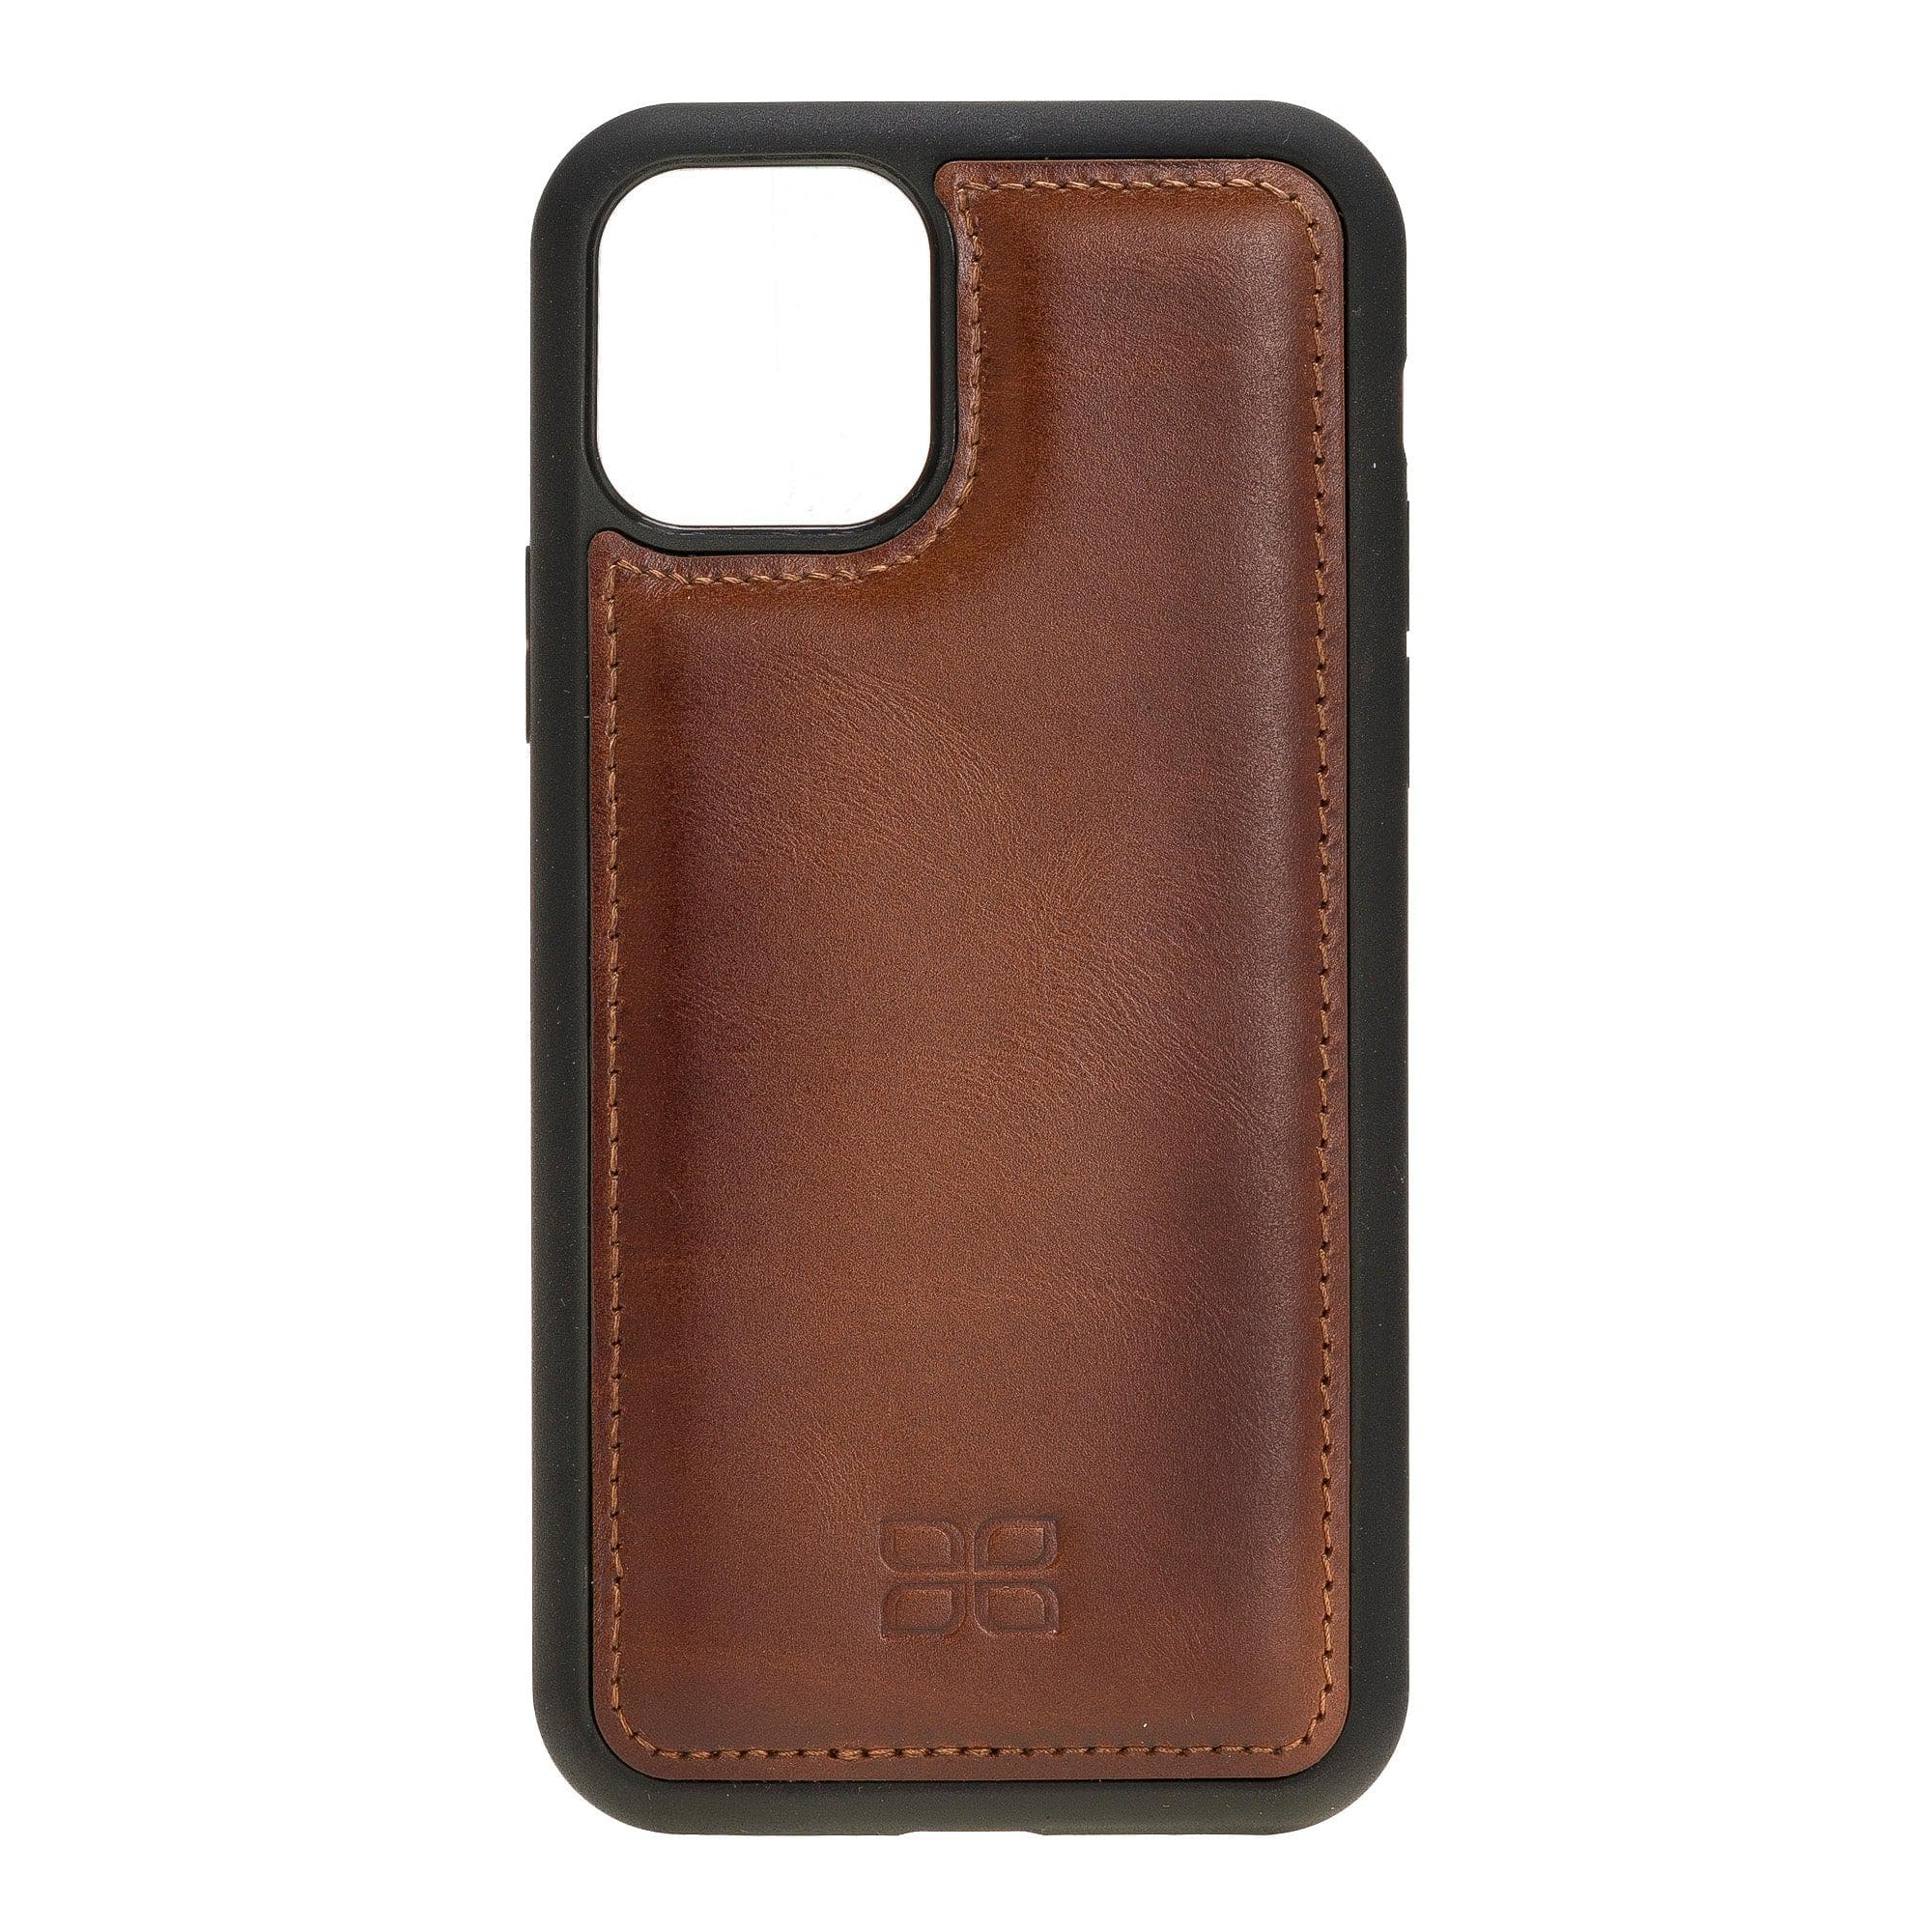 Flex Cover Leather Back Cover Case for Apple iPhone 11 Series iPhone 11 Pro 5.8" / Tan Bouletta LTD